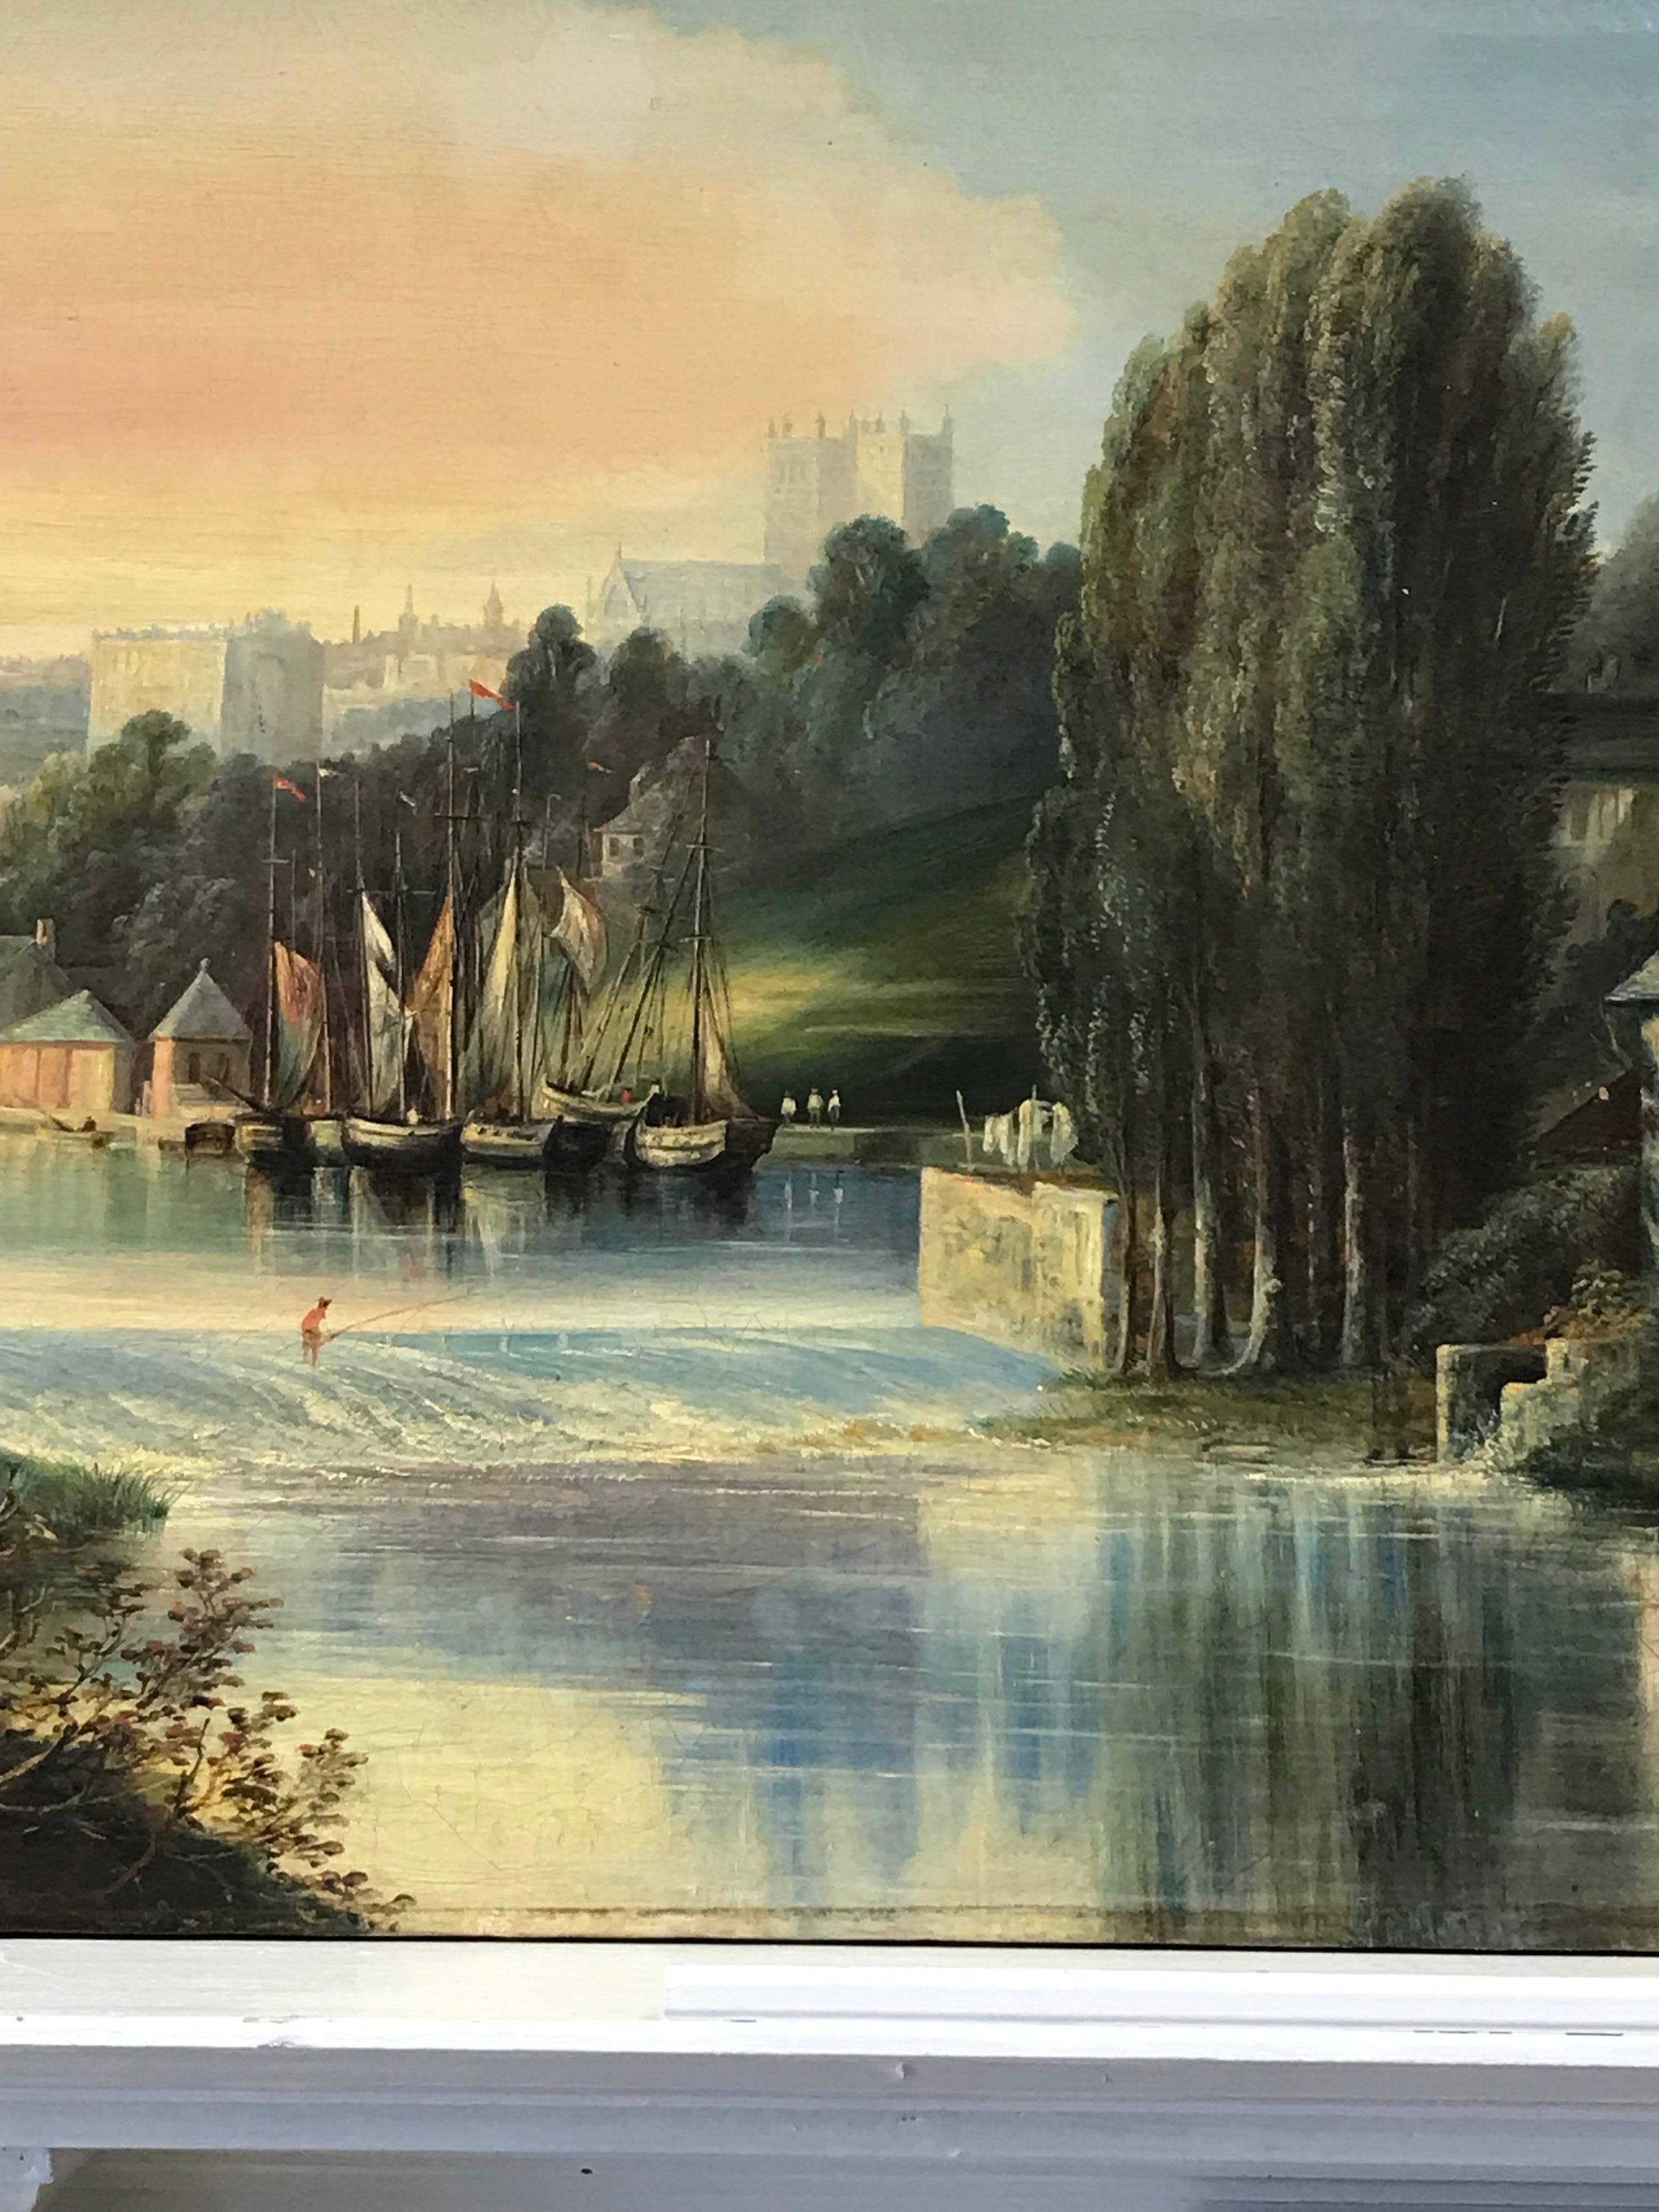 Artist/ School: British School, late 19th century

Title: The Ancient Castle

Medium:  oil painting on canvas, unframed

canvas:   22 x 30 inches

Provenance: private collection, UK

Condition: The painting is in overall very good and sound